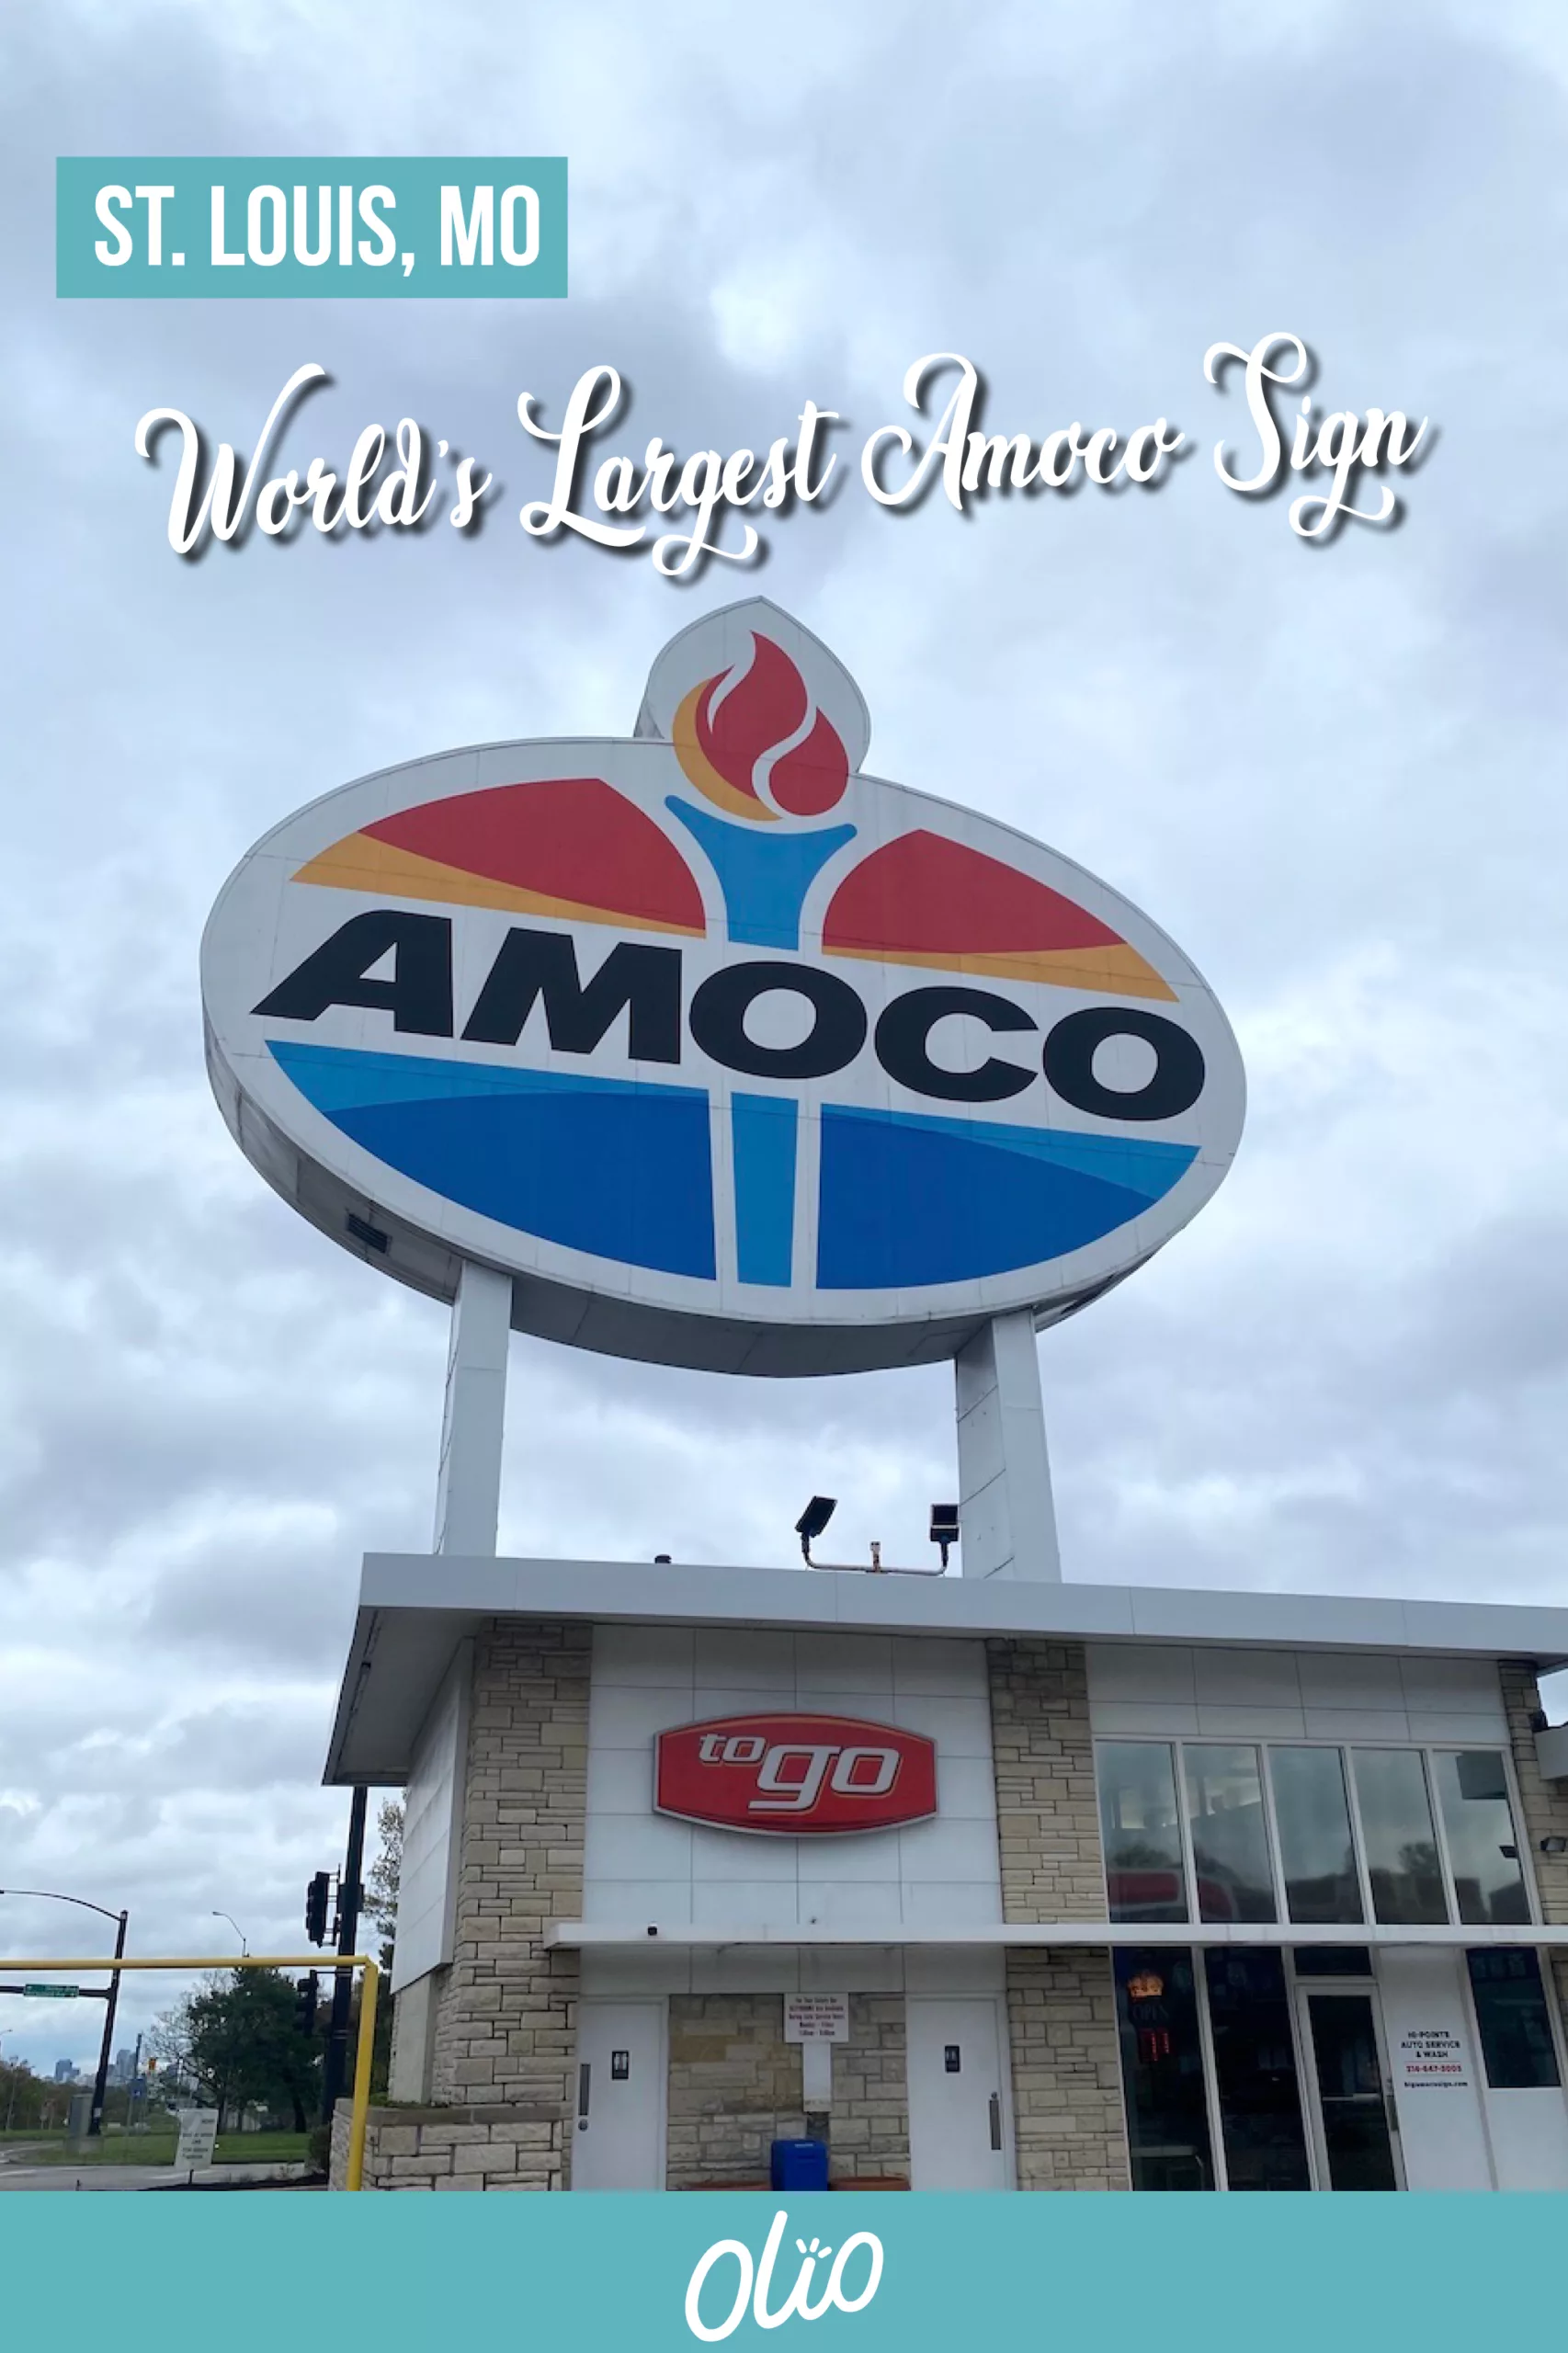 When it comes to roadside advertising, the gas station mentality seems to be that bigger is better. At least that’s true for the St. Louis, Missouri station attached to the World’s Largest Amoco Sign. While this sign is attached to a modern gas station, its history dates back more than 100 years.